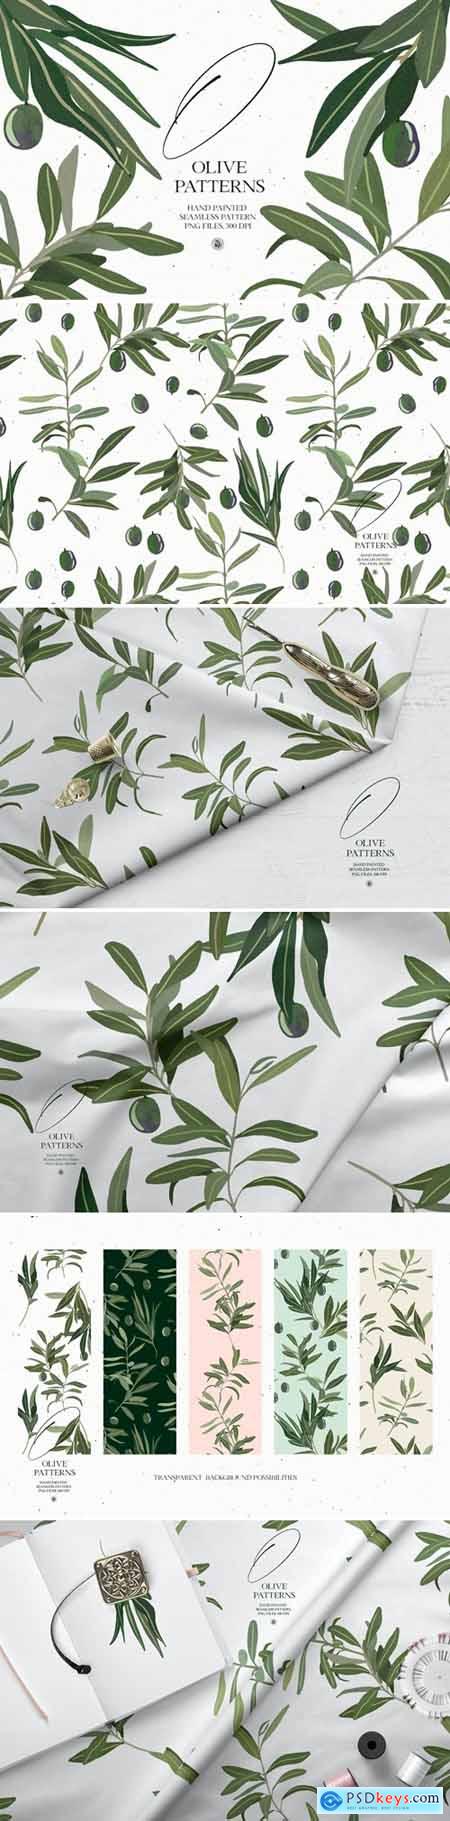 Olive Patterns - hand painted patterns